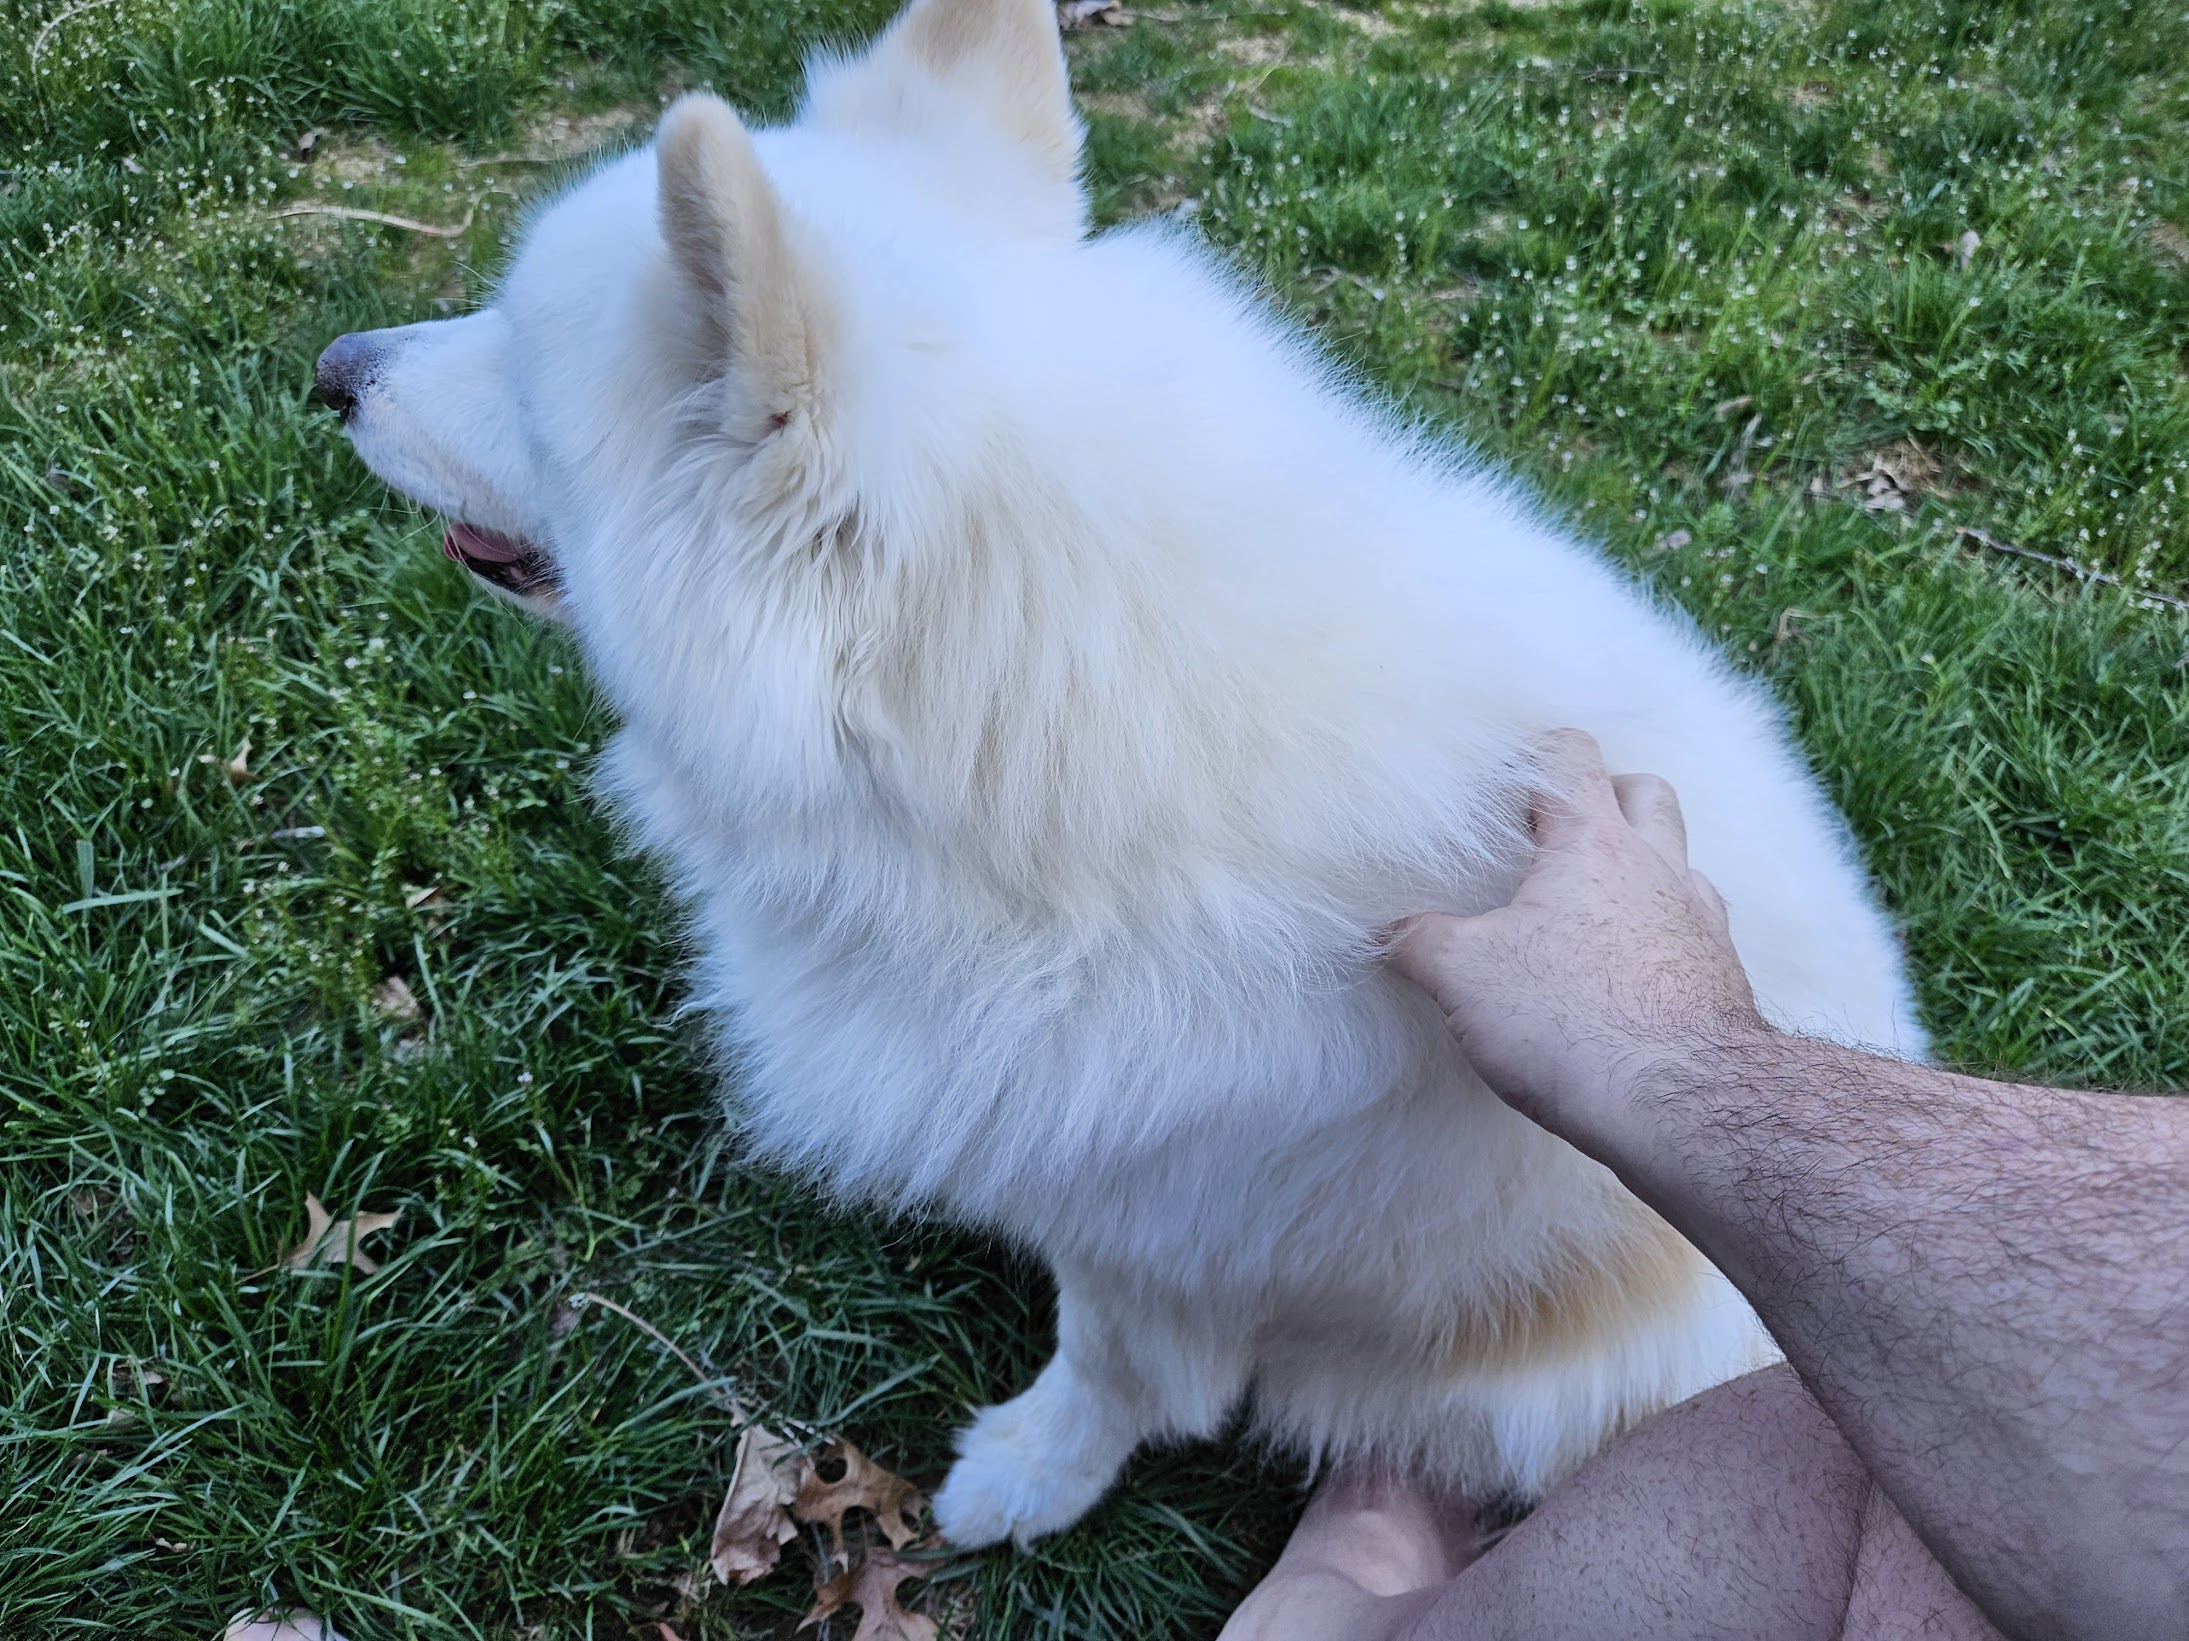 Samoyed in grass being pet